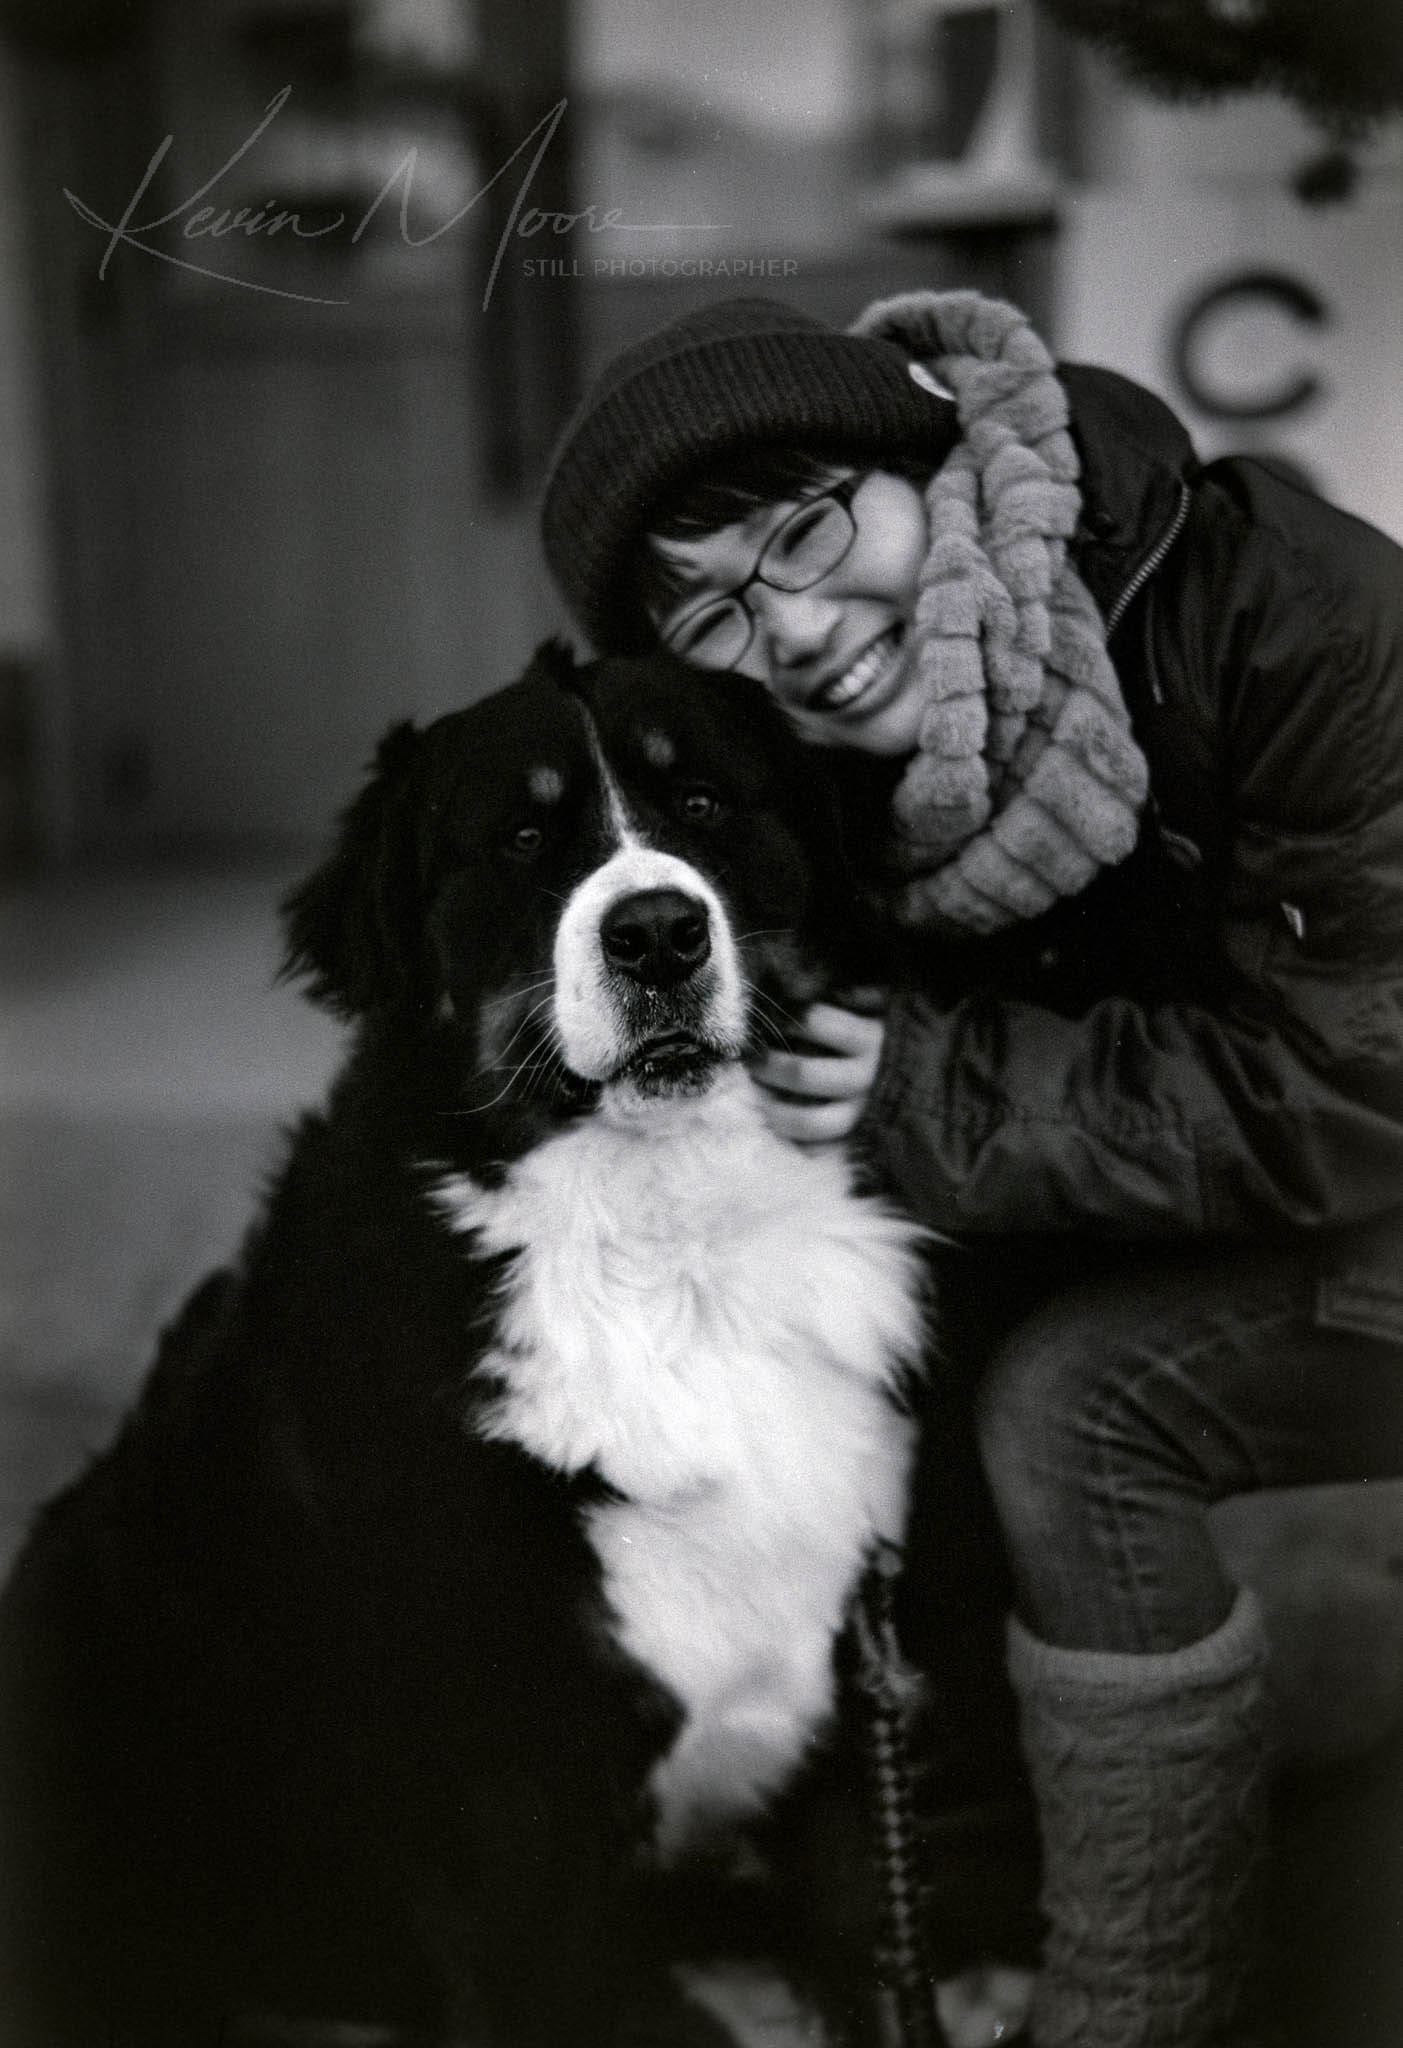 Woman sharing a loving moment with her Bernese Mountain Dog in an urban setting.